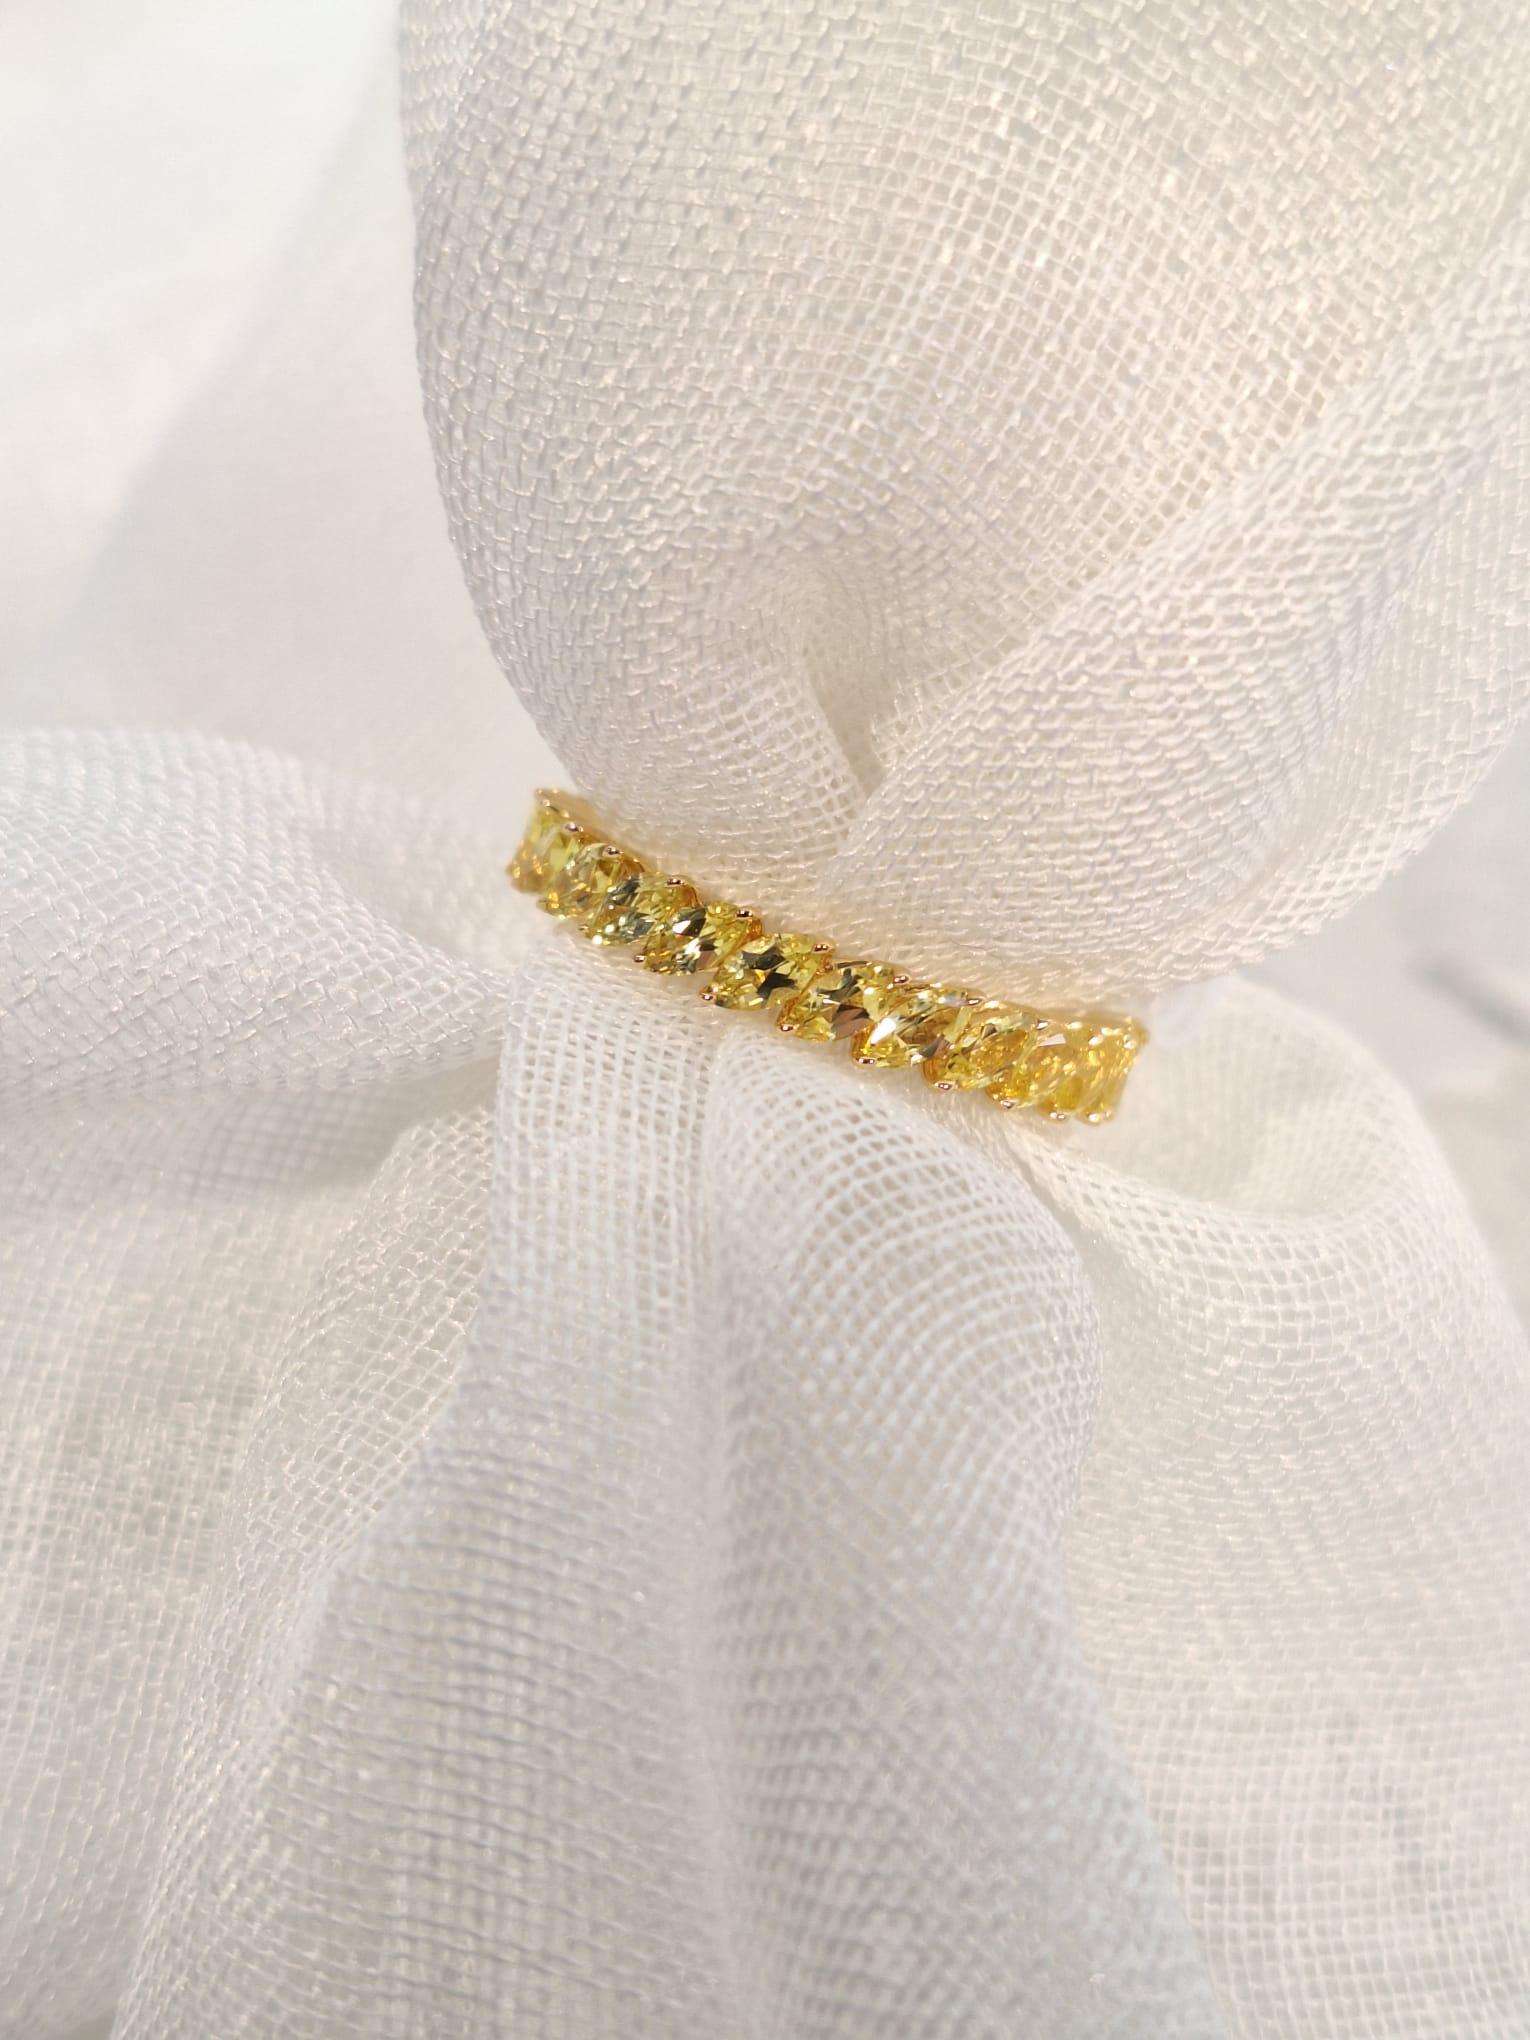 GILIN 18K Yellow Gold Ring with Yellow Sapphire For Sale 3